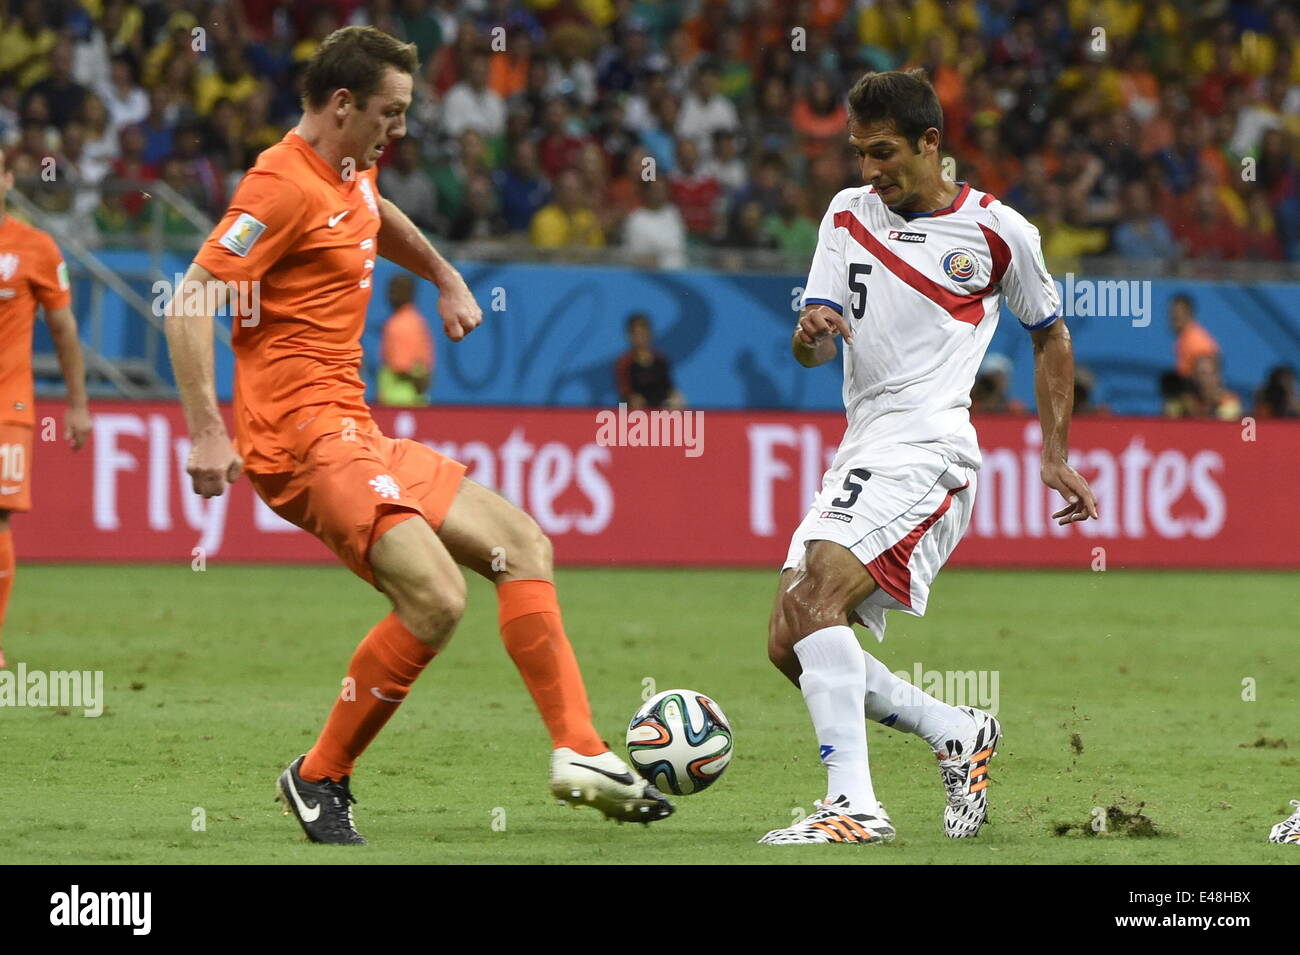 Salvador, Brazil. 5th July, 2014. Netherlands's Stefan de Vrij vies with Costa Rica's Celso Borges during a quarter-finals match between Netherlands and Costa Rica of 2014 FIFA World Cup at the Arena Fonte Nova Stadium in Salvador, Brazil, on July 5, 2014. Credit:  Lui Siu Wai/Xinhua/Alamy Live News Stock Photo